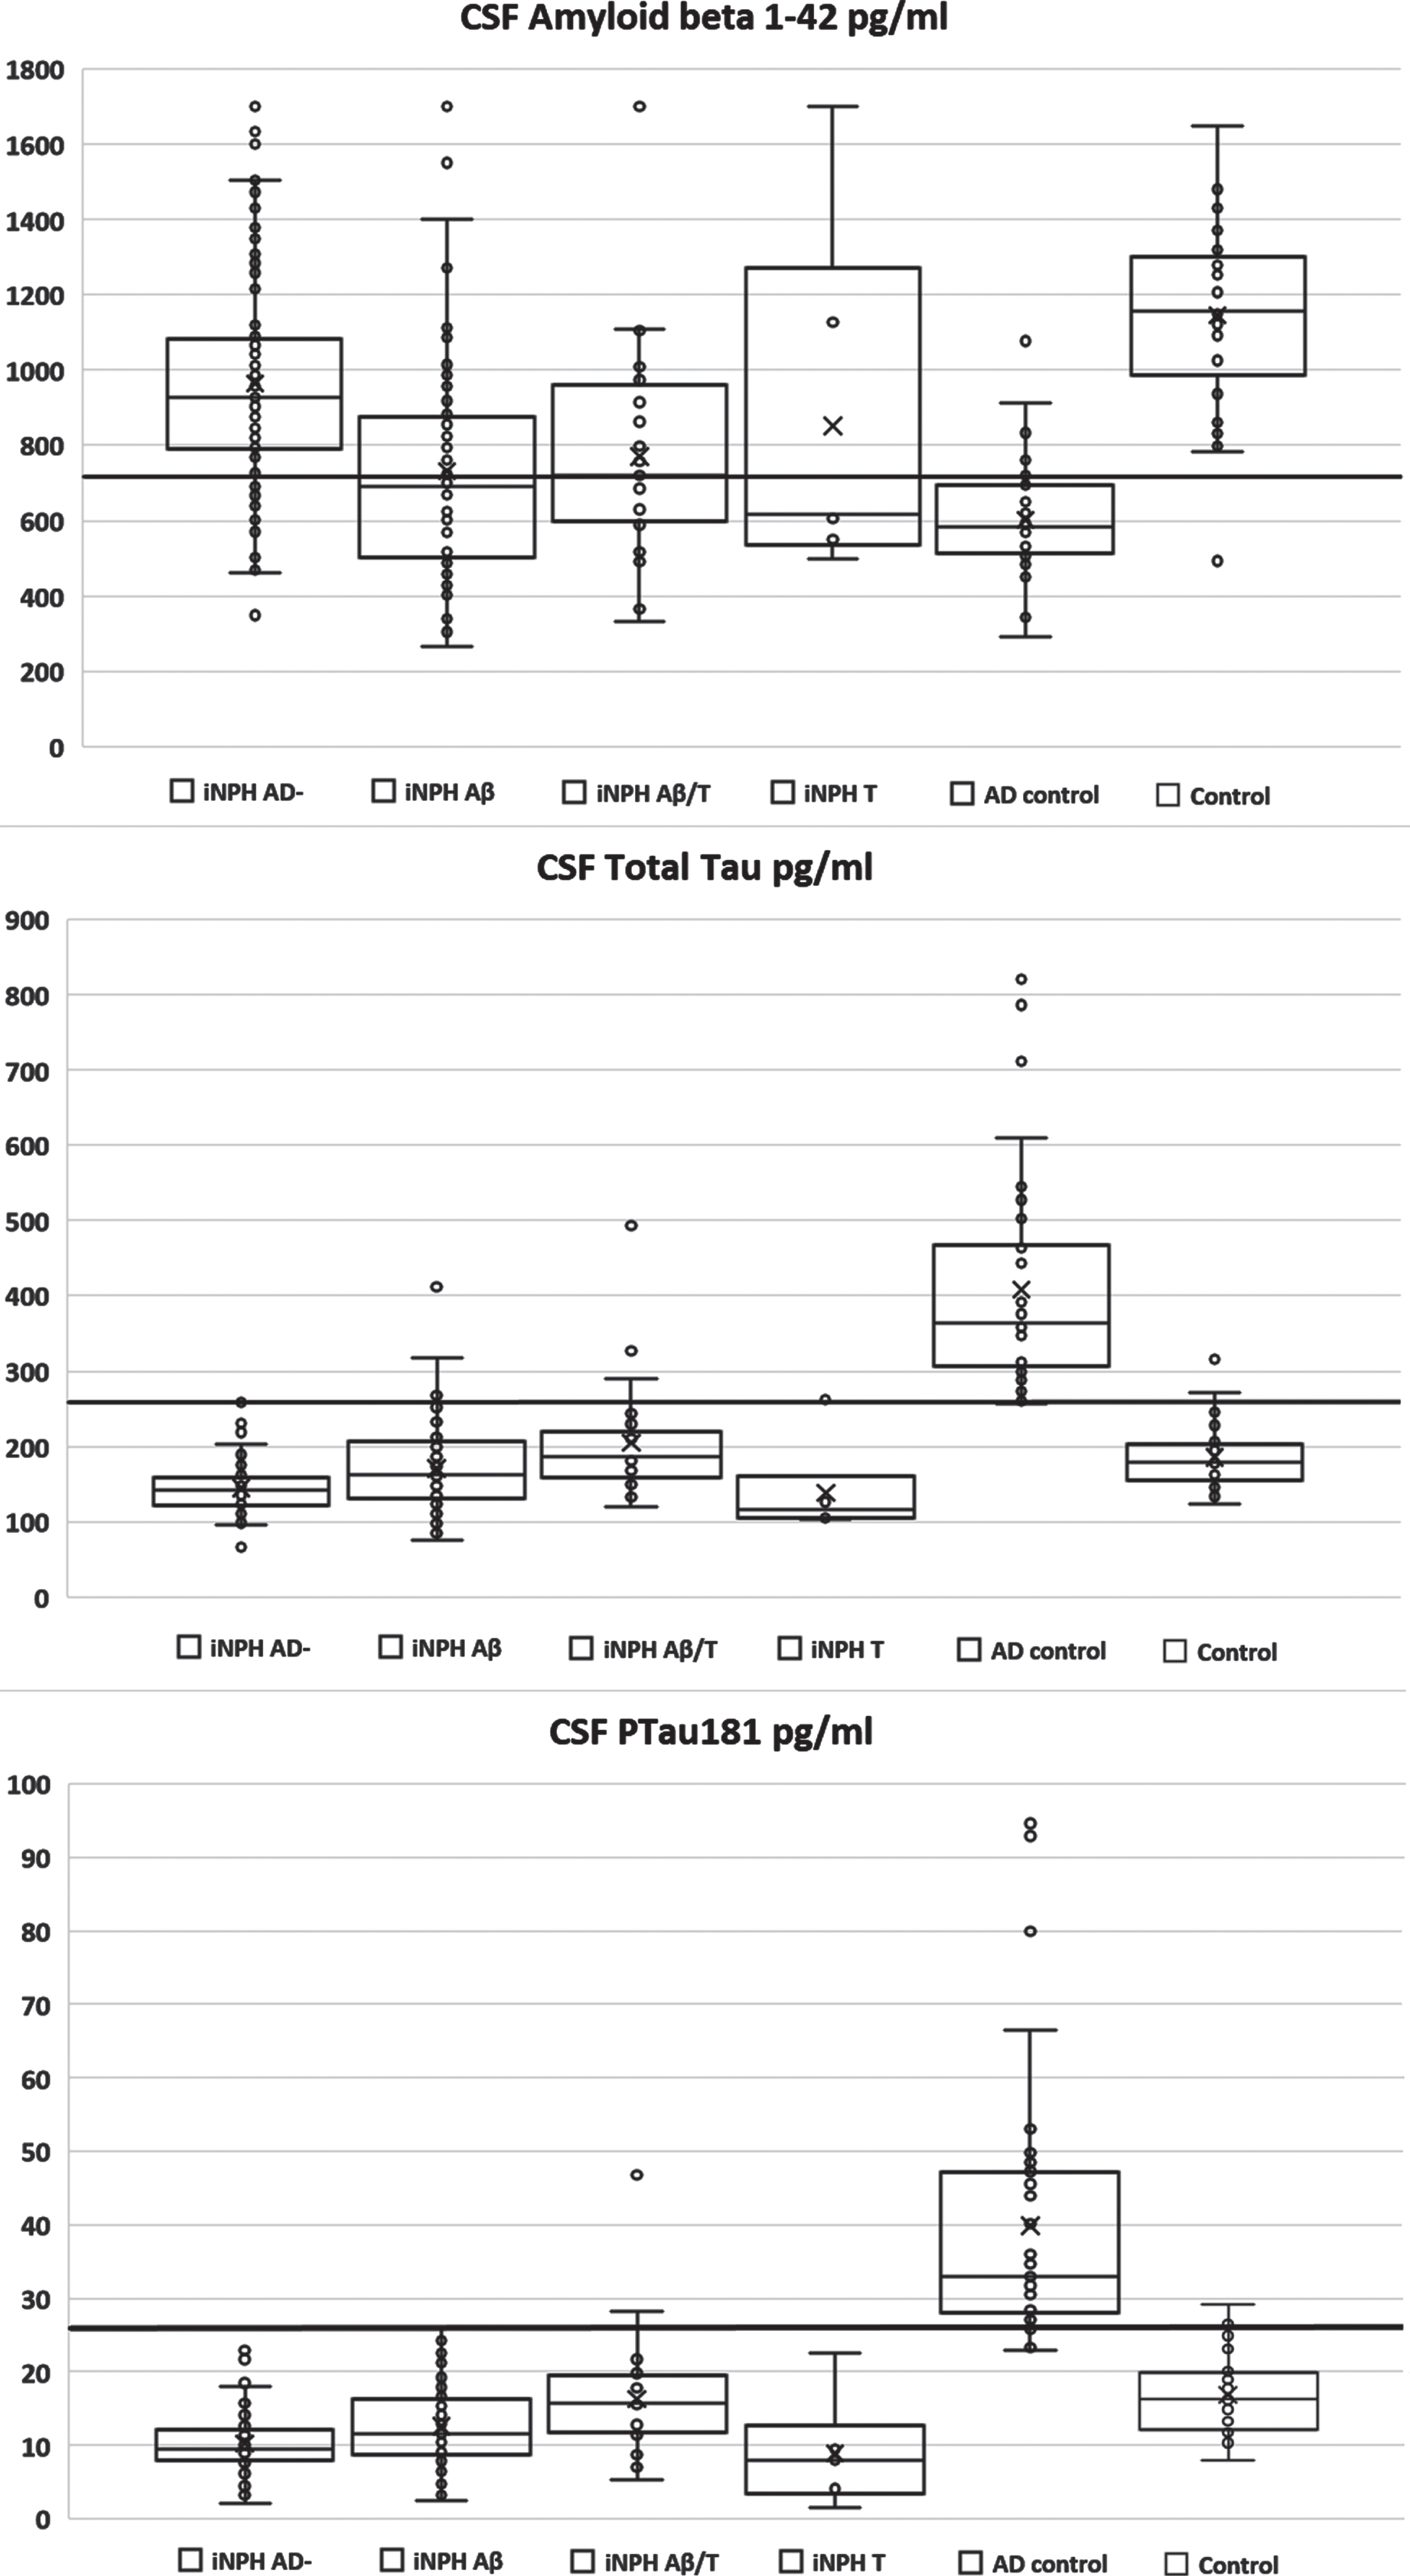 Boxplots for AD biomarkers with cutoff values. Horizontal lines indicate cutoff value for diagnosis of AD in standard population. 715 pg/ml for Aβ1 - 42, 260 pg/ml for t-Tau, and 26 pg/ml for P-Tau181.